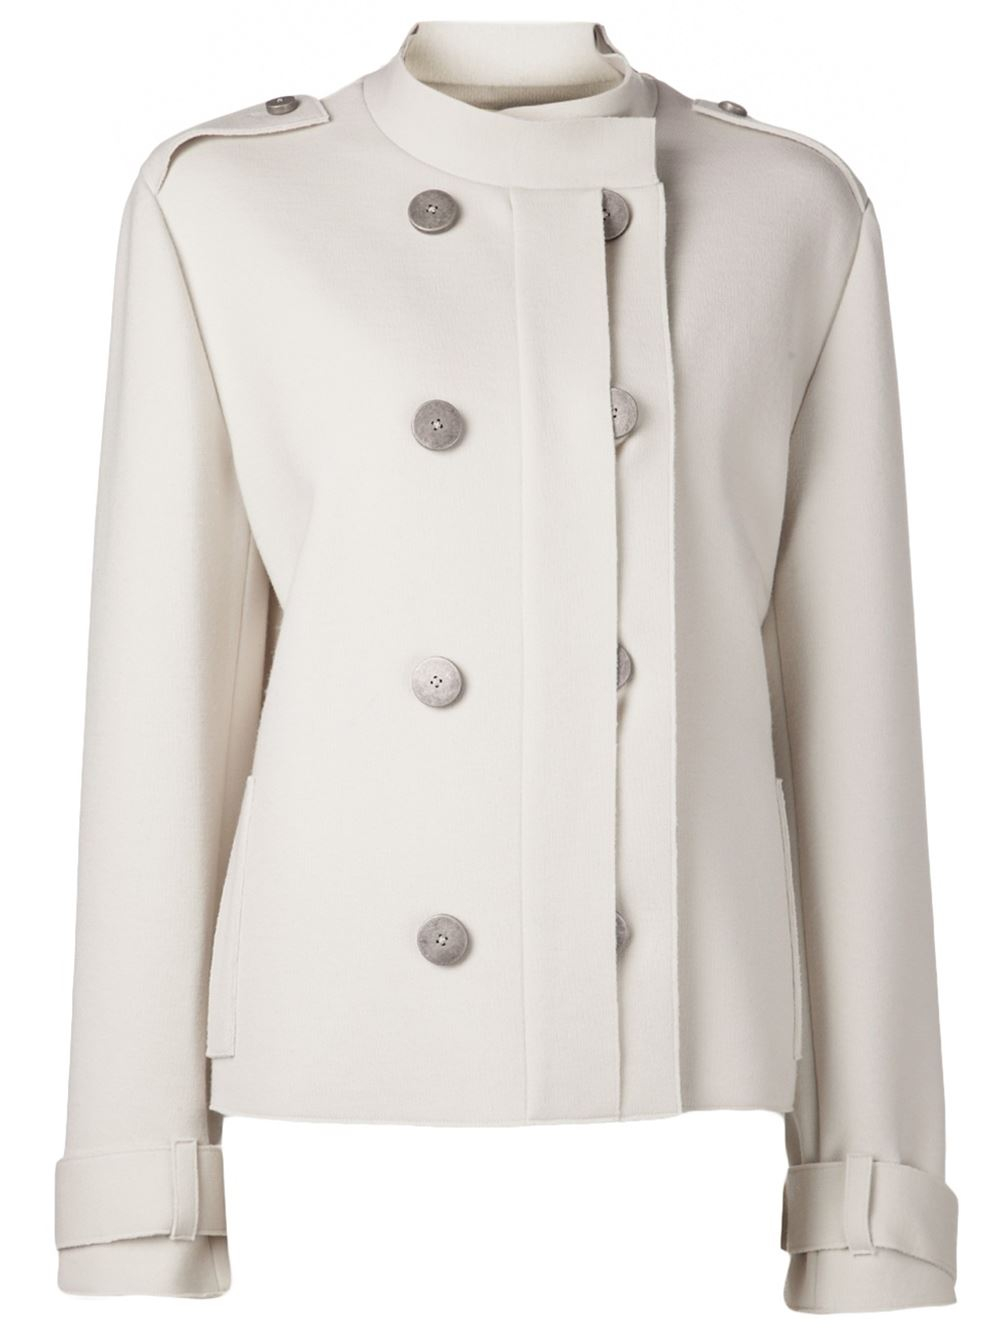 Lyst - Lanvin Double Breasted Jacket in White